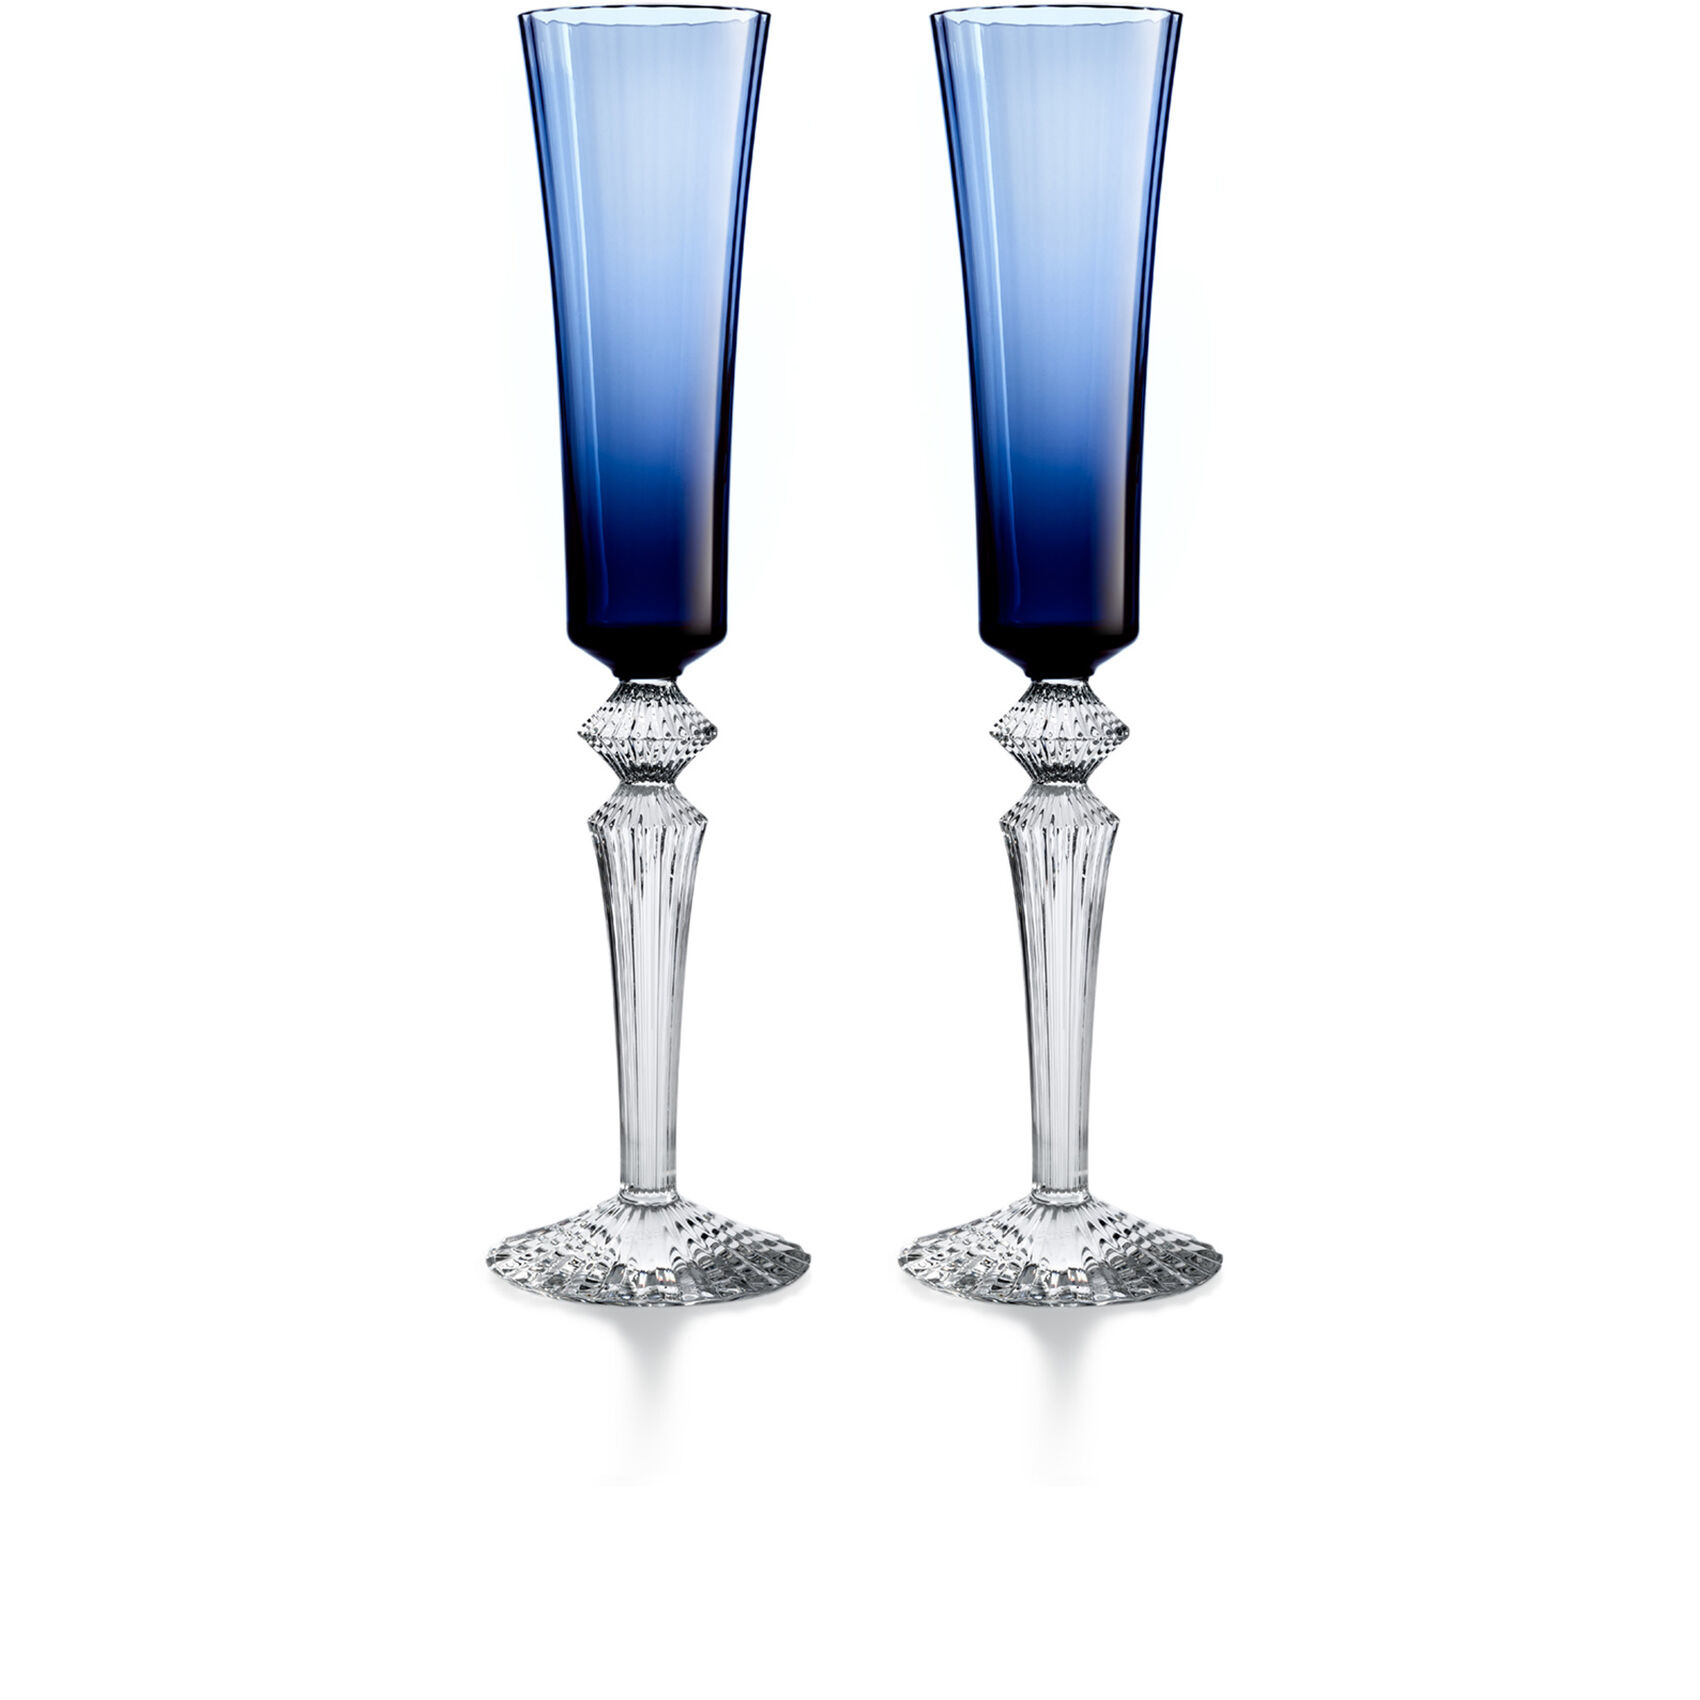 Baccarat Mille Nuits S/2 Flutissimo Midnight Blue